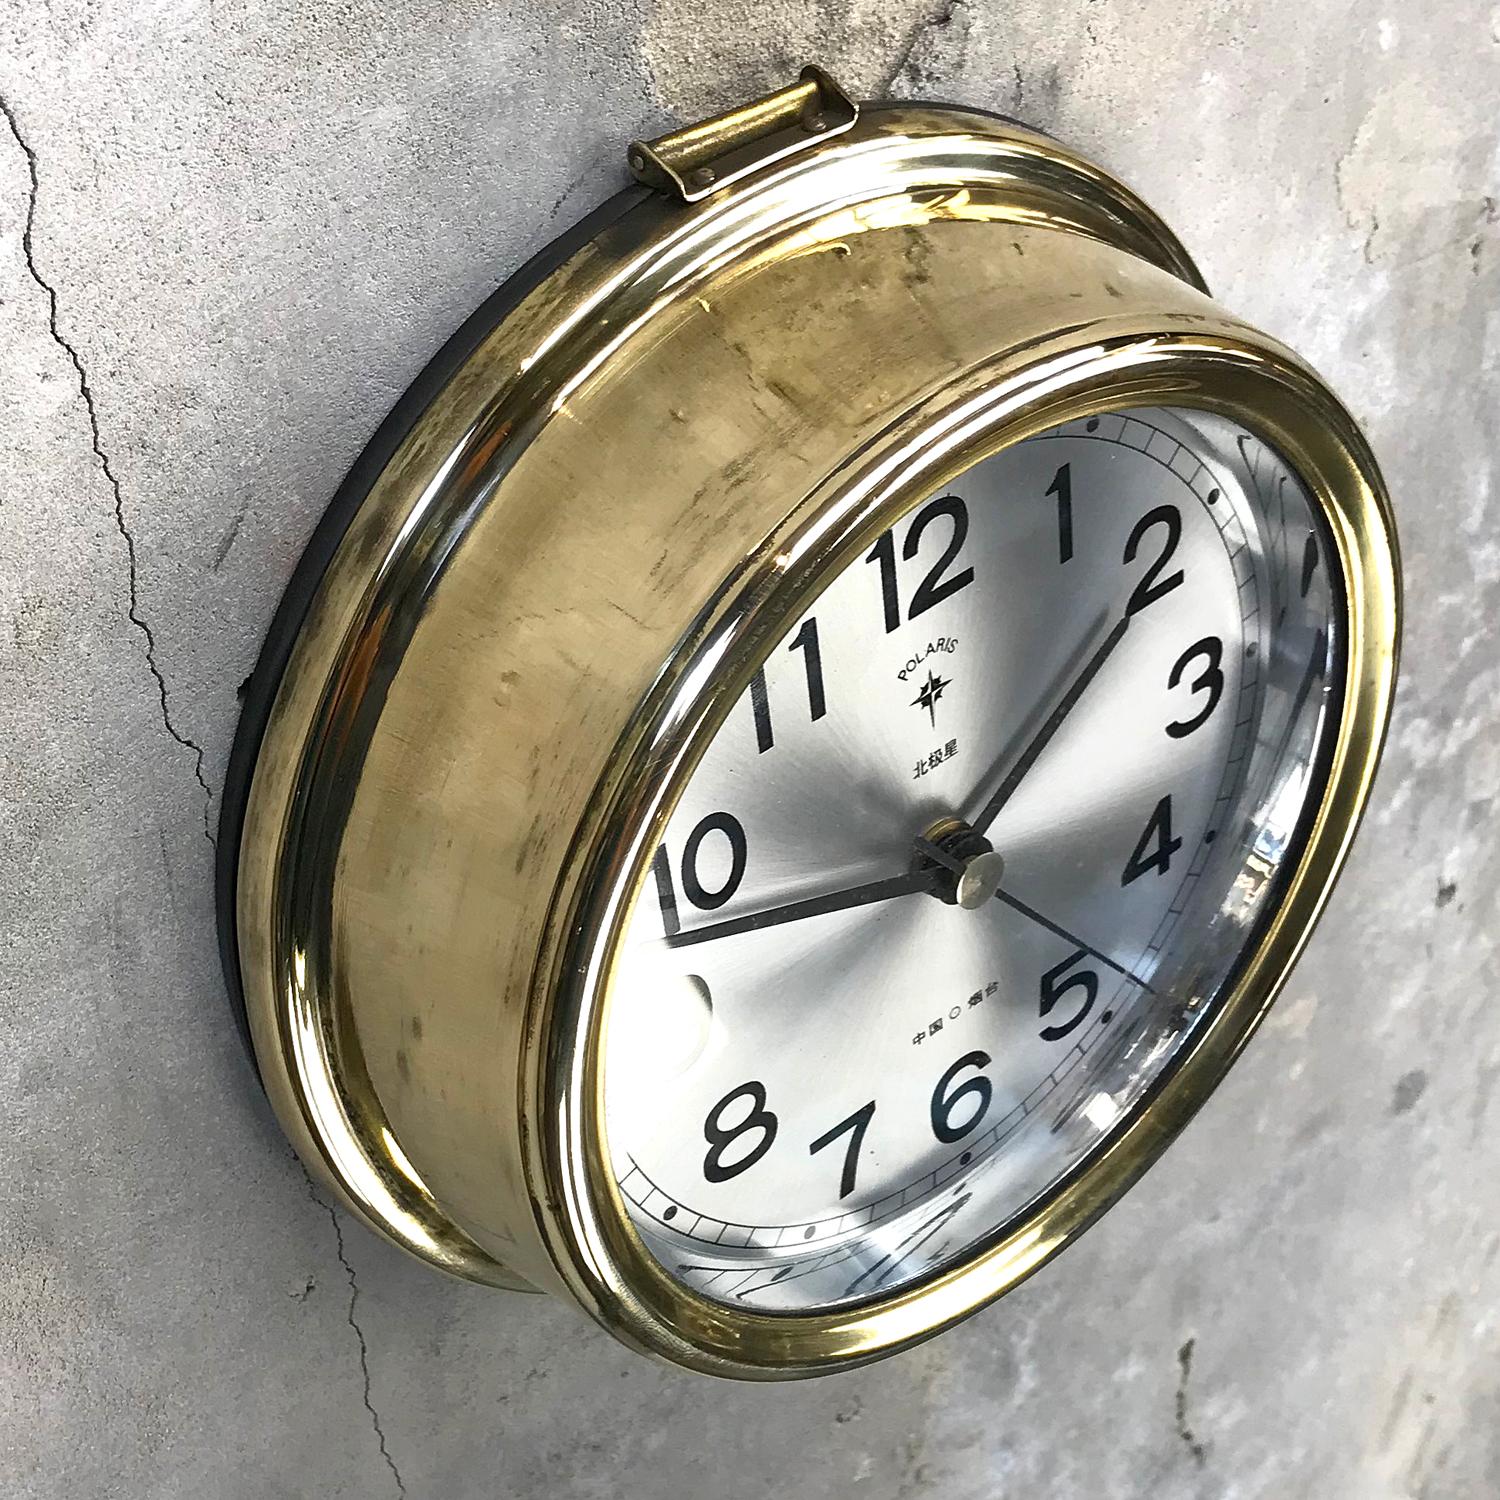 A reclaimed and restored marine slave clock made by Polaris.

Originally found on ocean liners and sea going vessels.

These clocks were used in great number on large ocean liners built during the 1970s and housed a movement that would be controlled